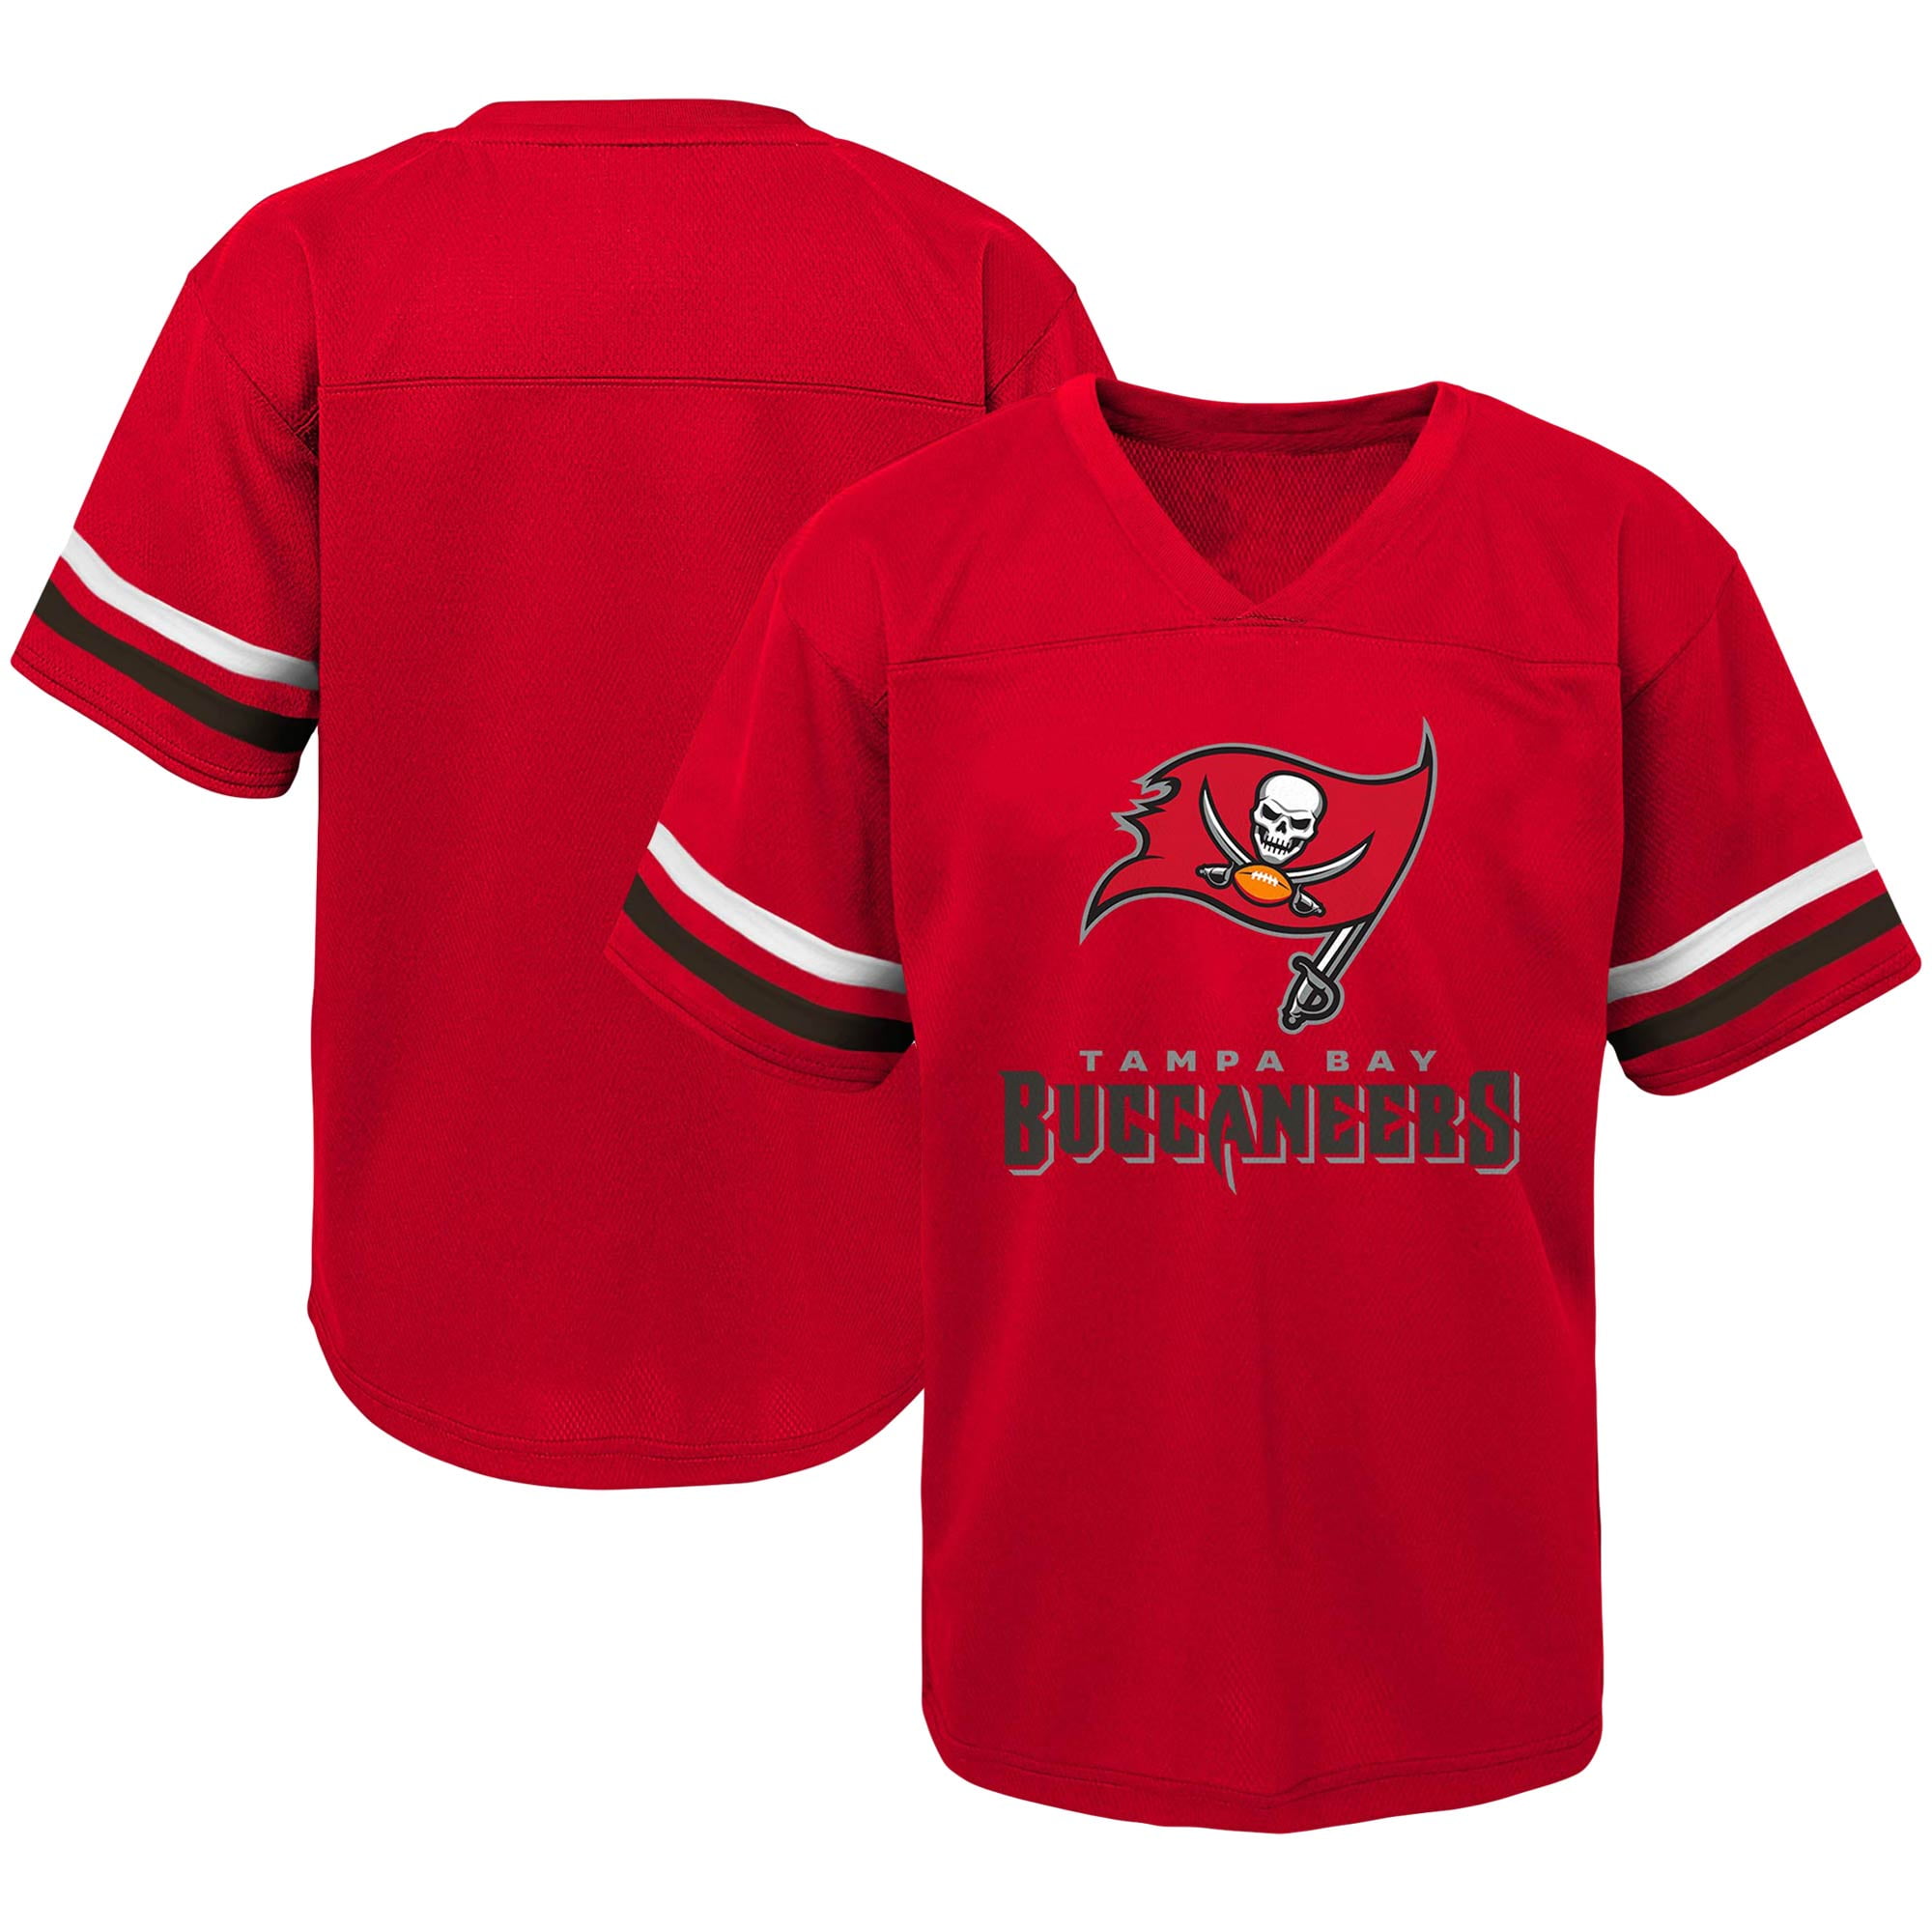 Youth Red Tampa Bay Buccaneers Mesh 